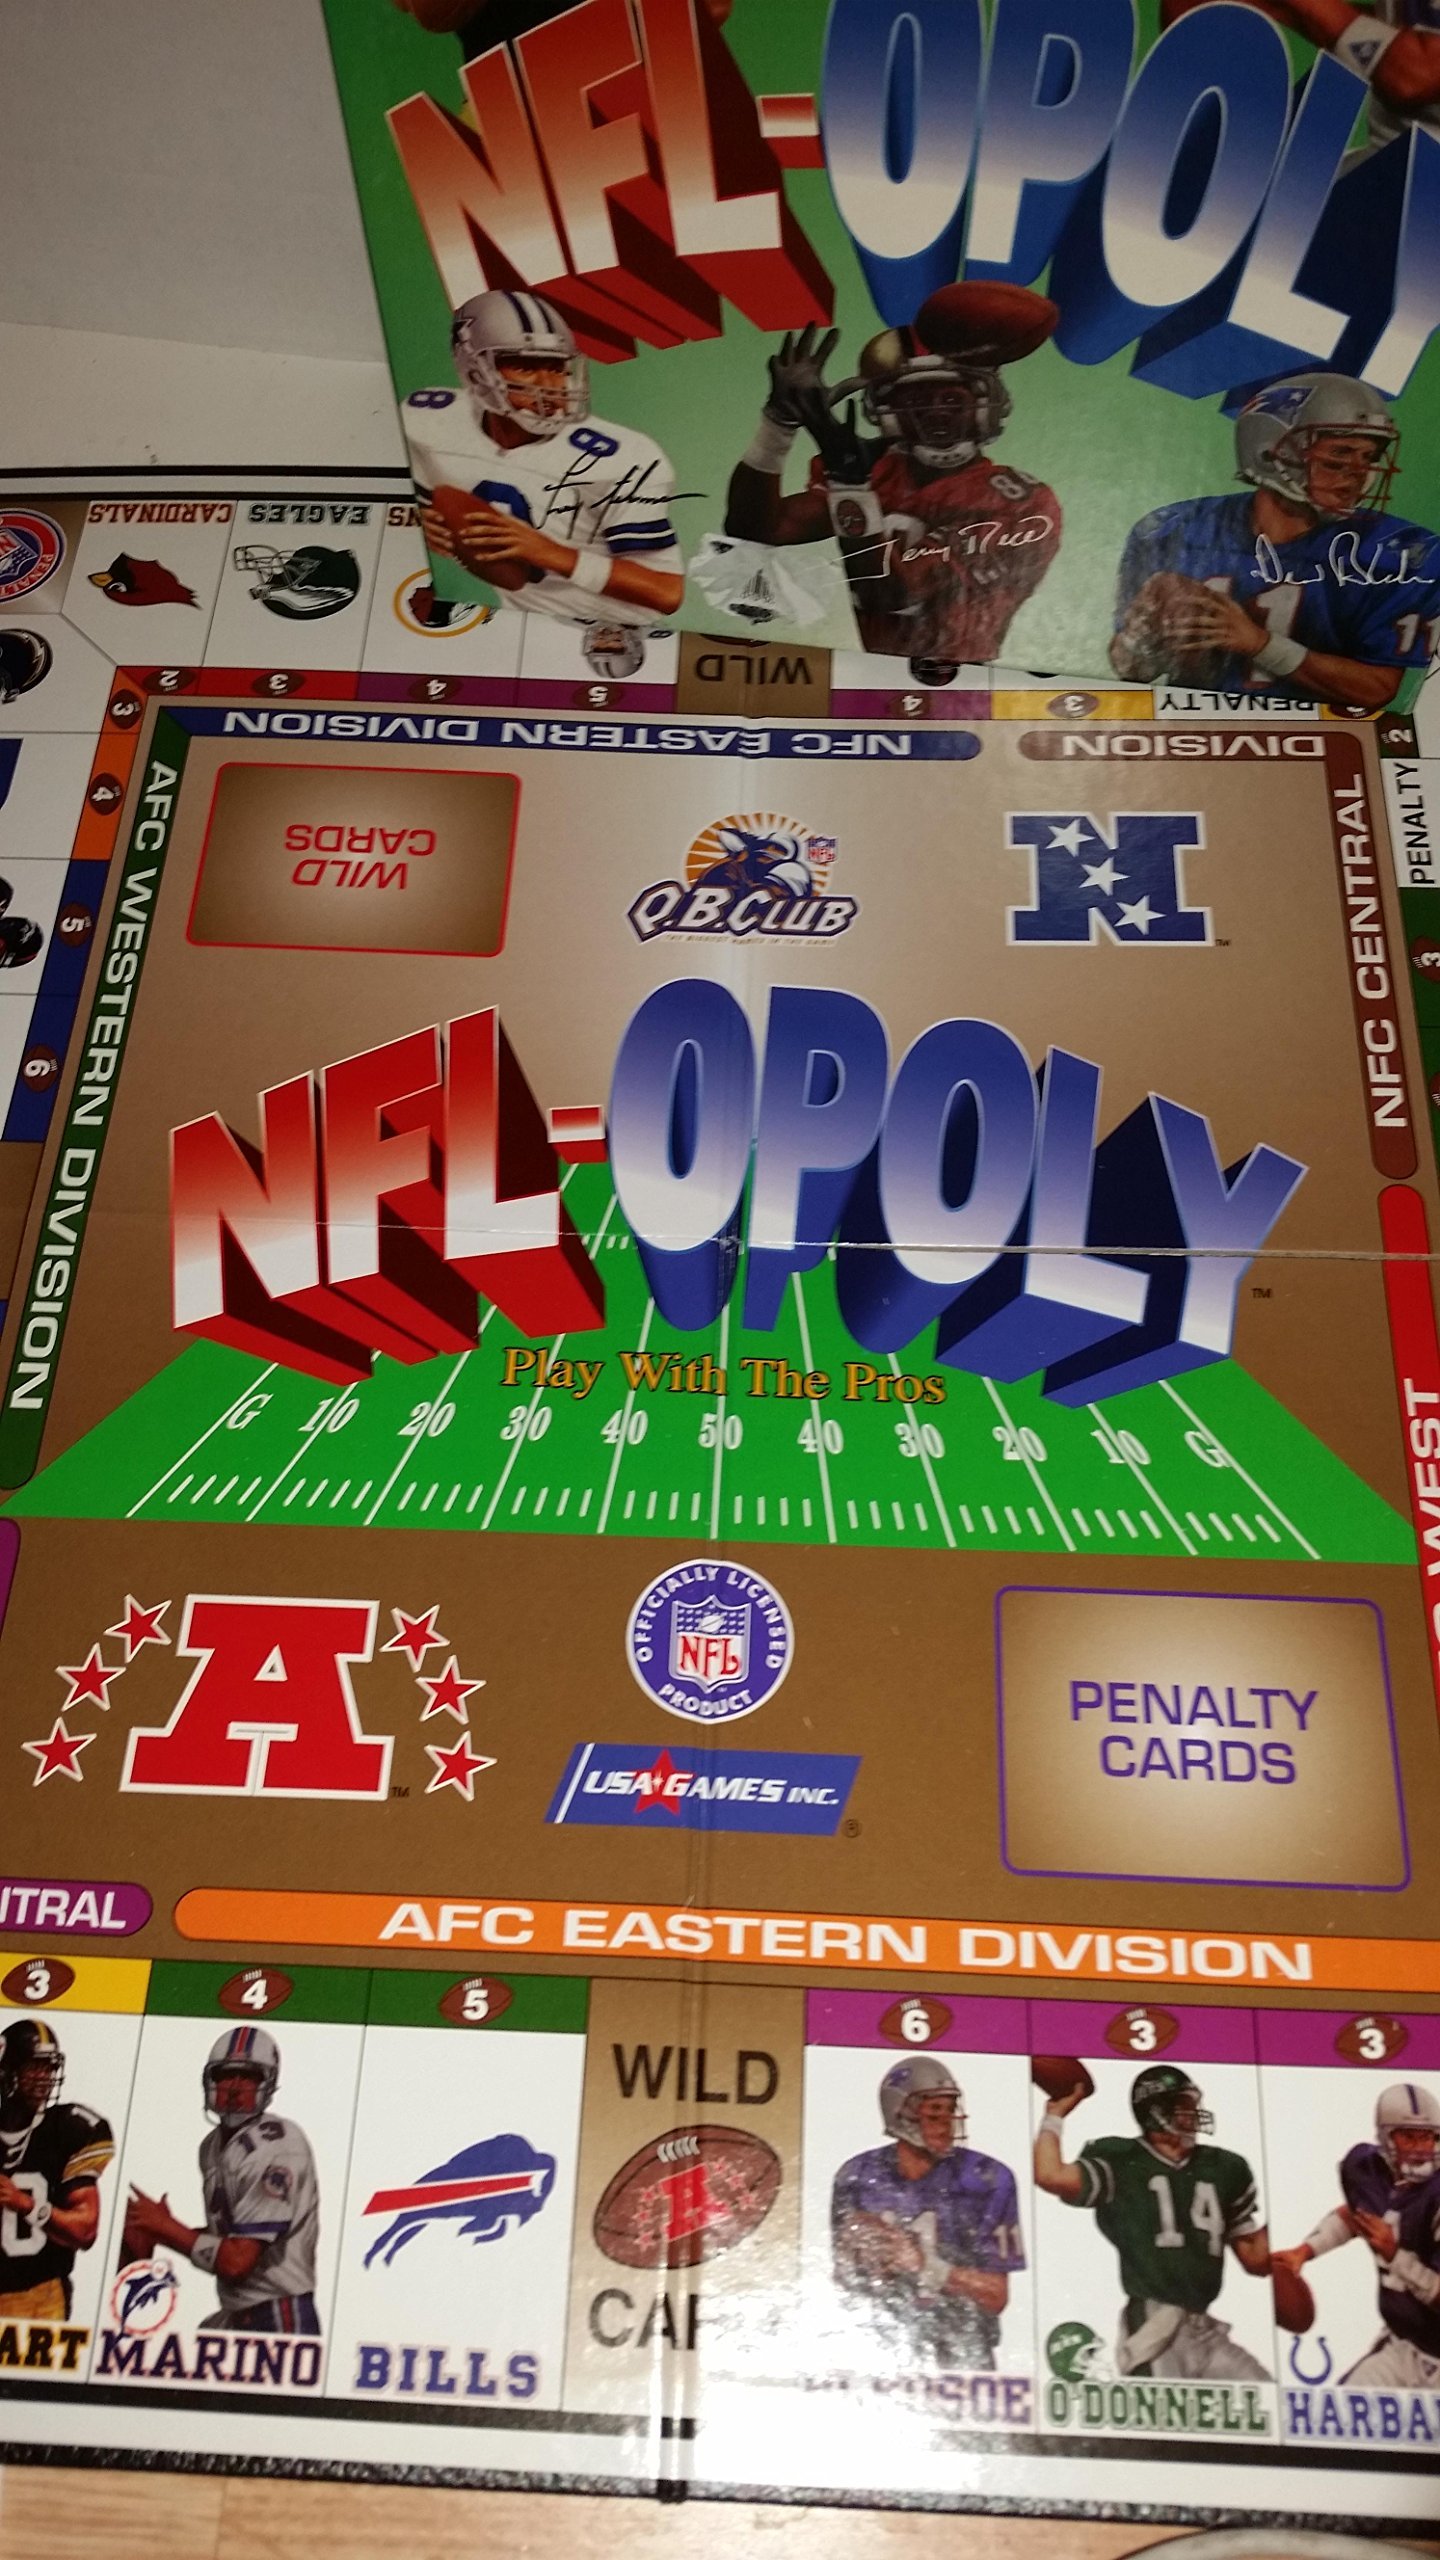 NFL-OPOLY - The Game of Champions